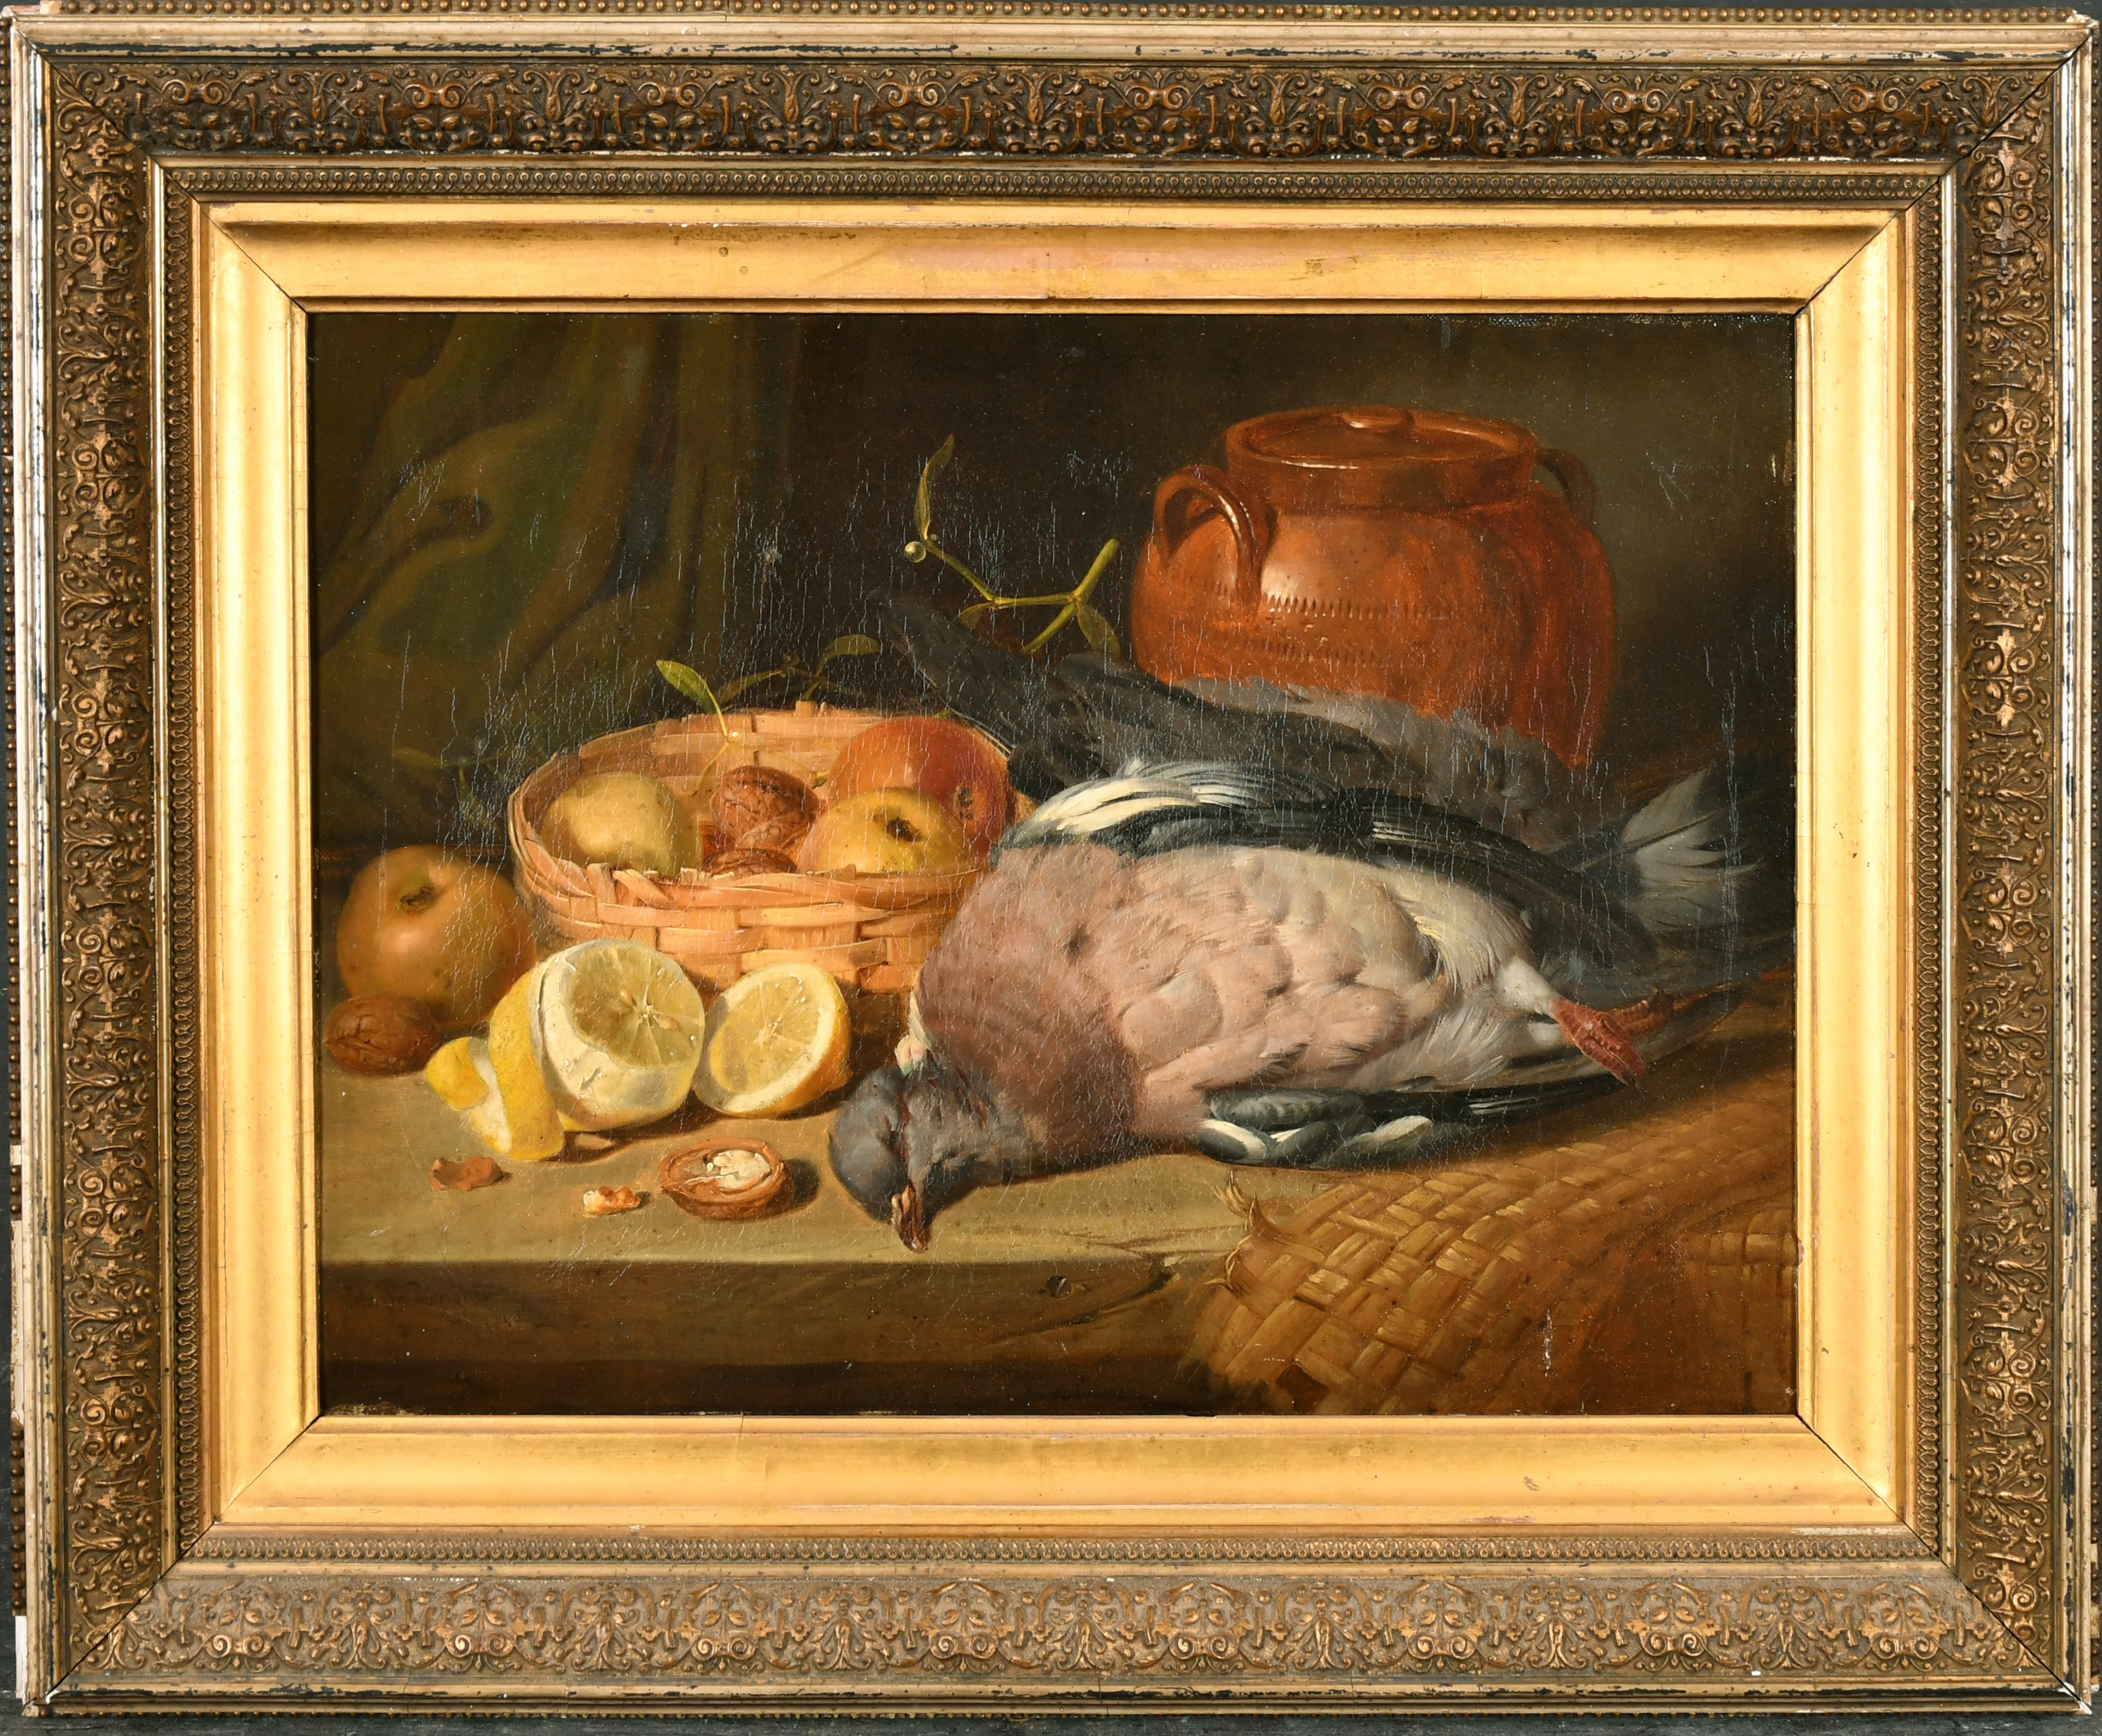 John Wainwright (act.c.1860-1869) British. Still Life of Fruit and Dead Game, Oil on canvas, - Image 2 of 4